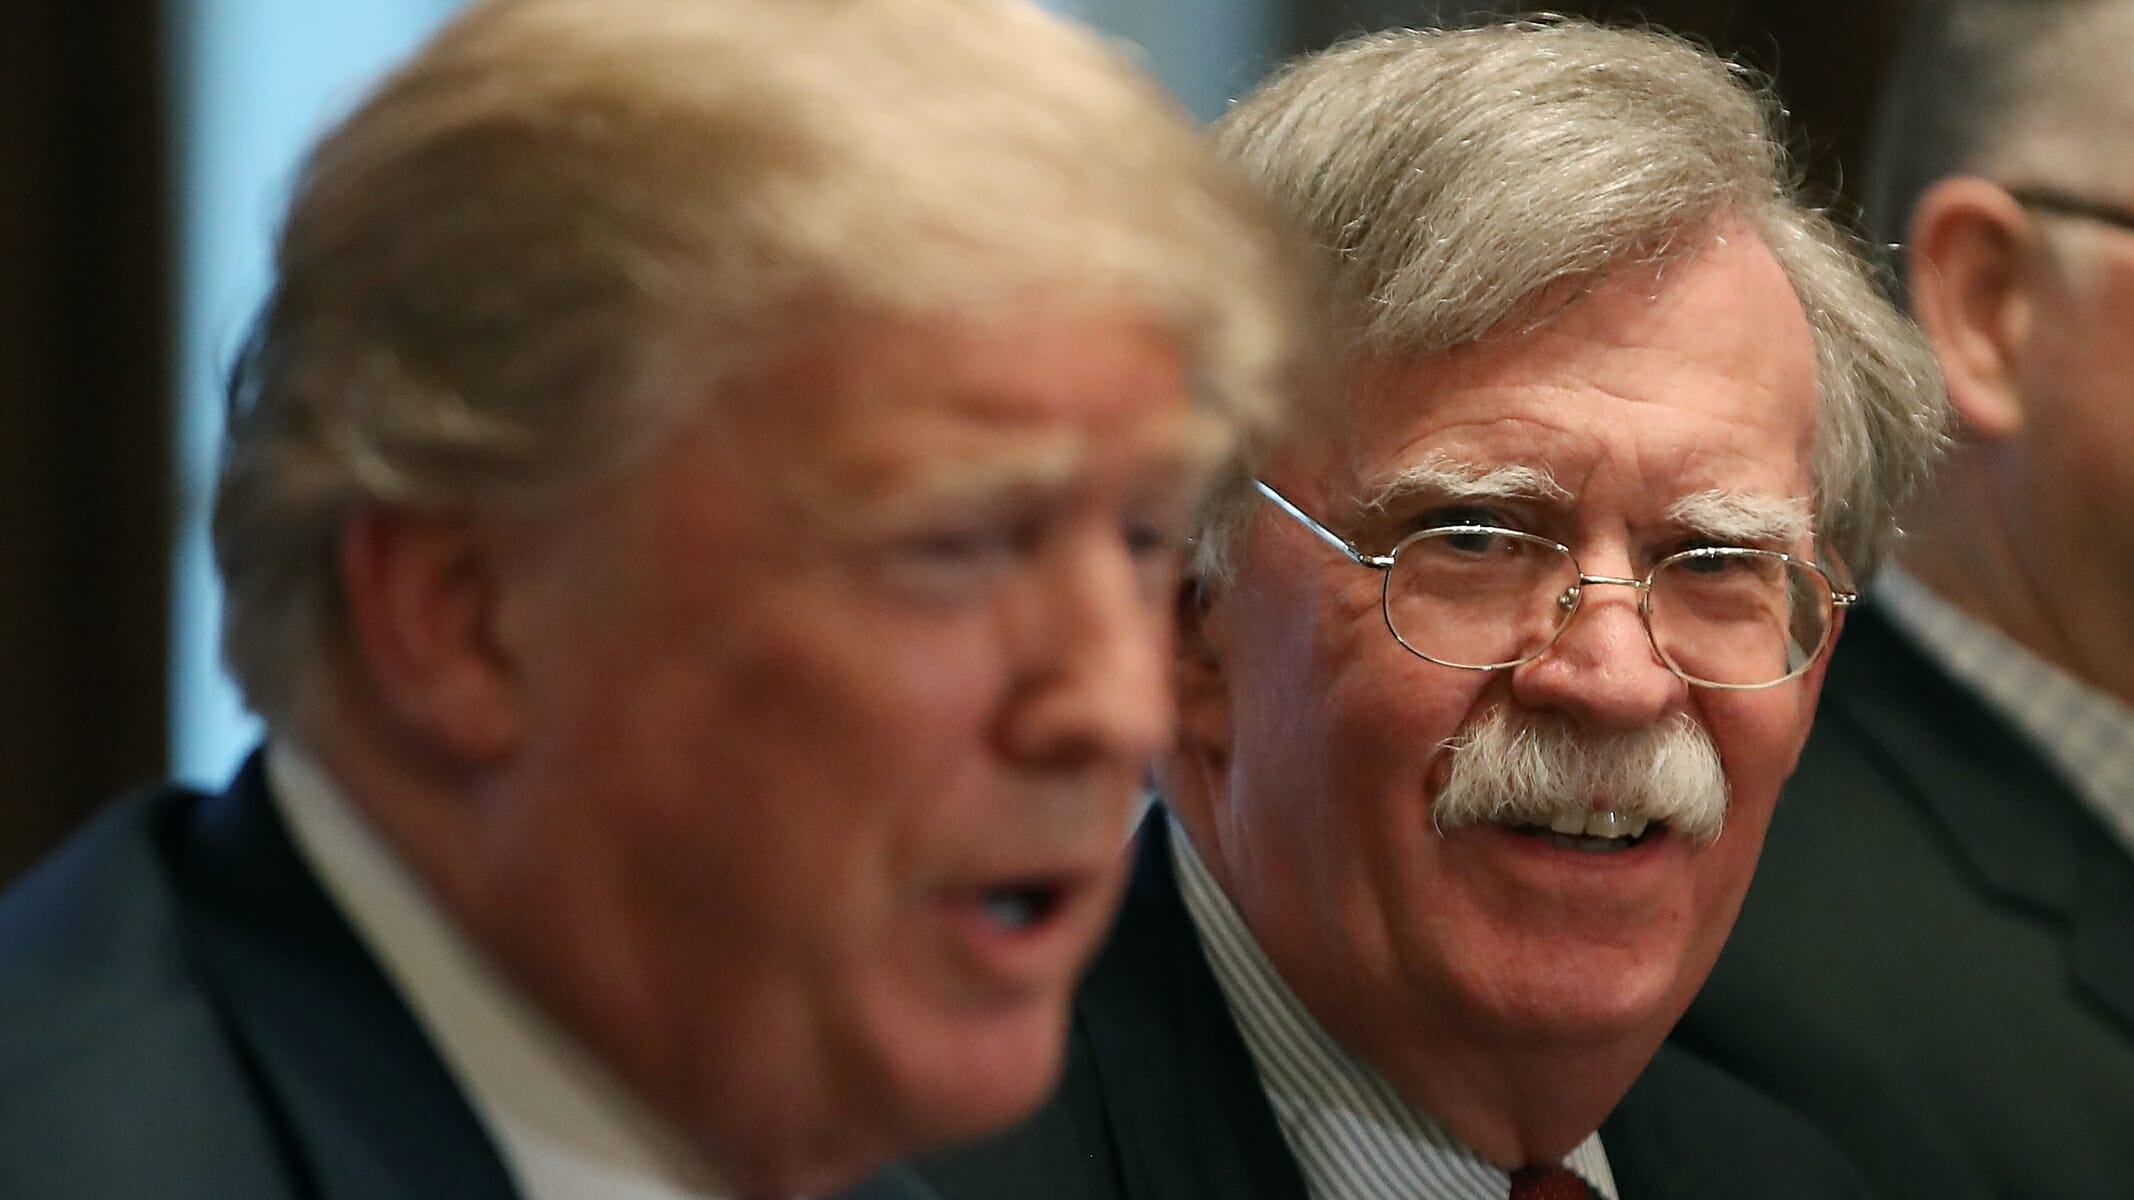 If the White House Wants War with Iran, They’re Probably Going to Get It